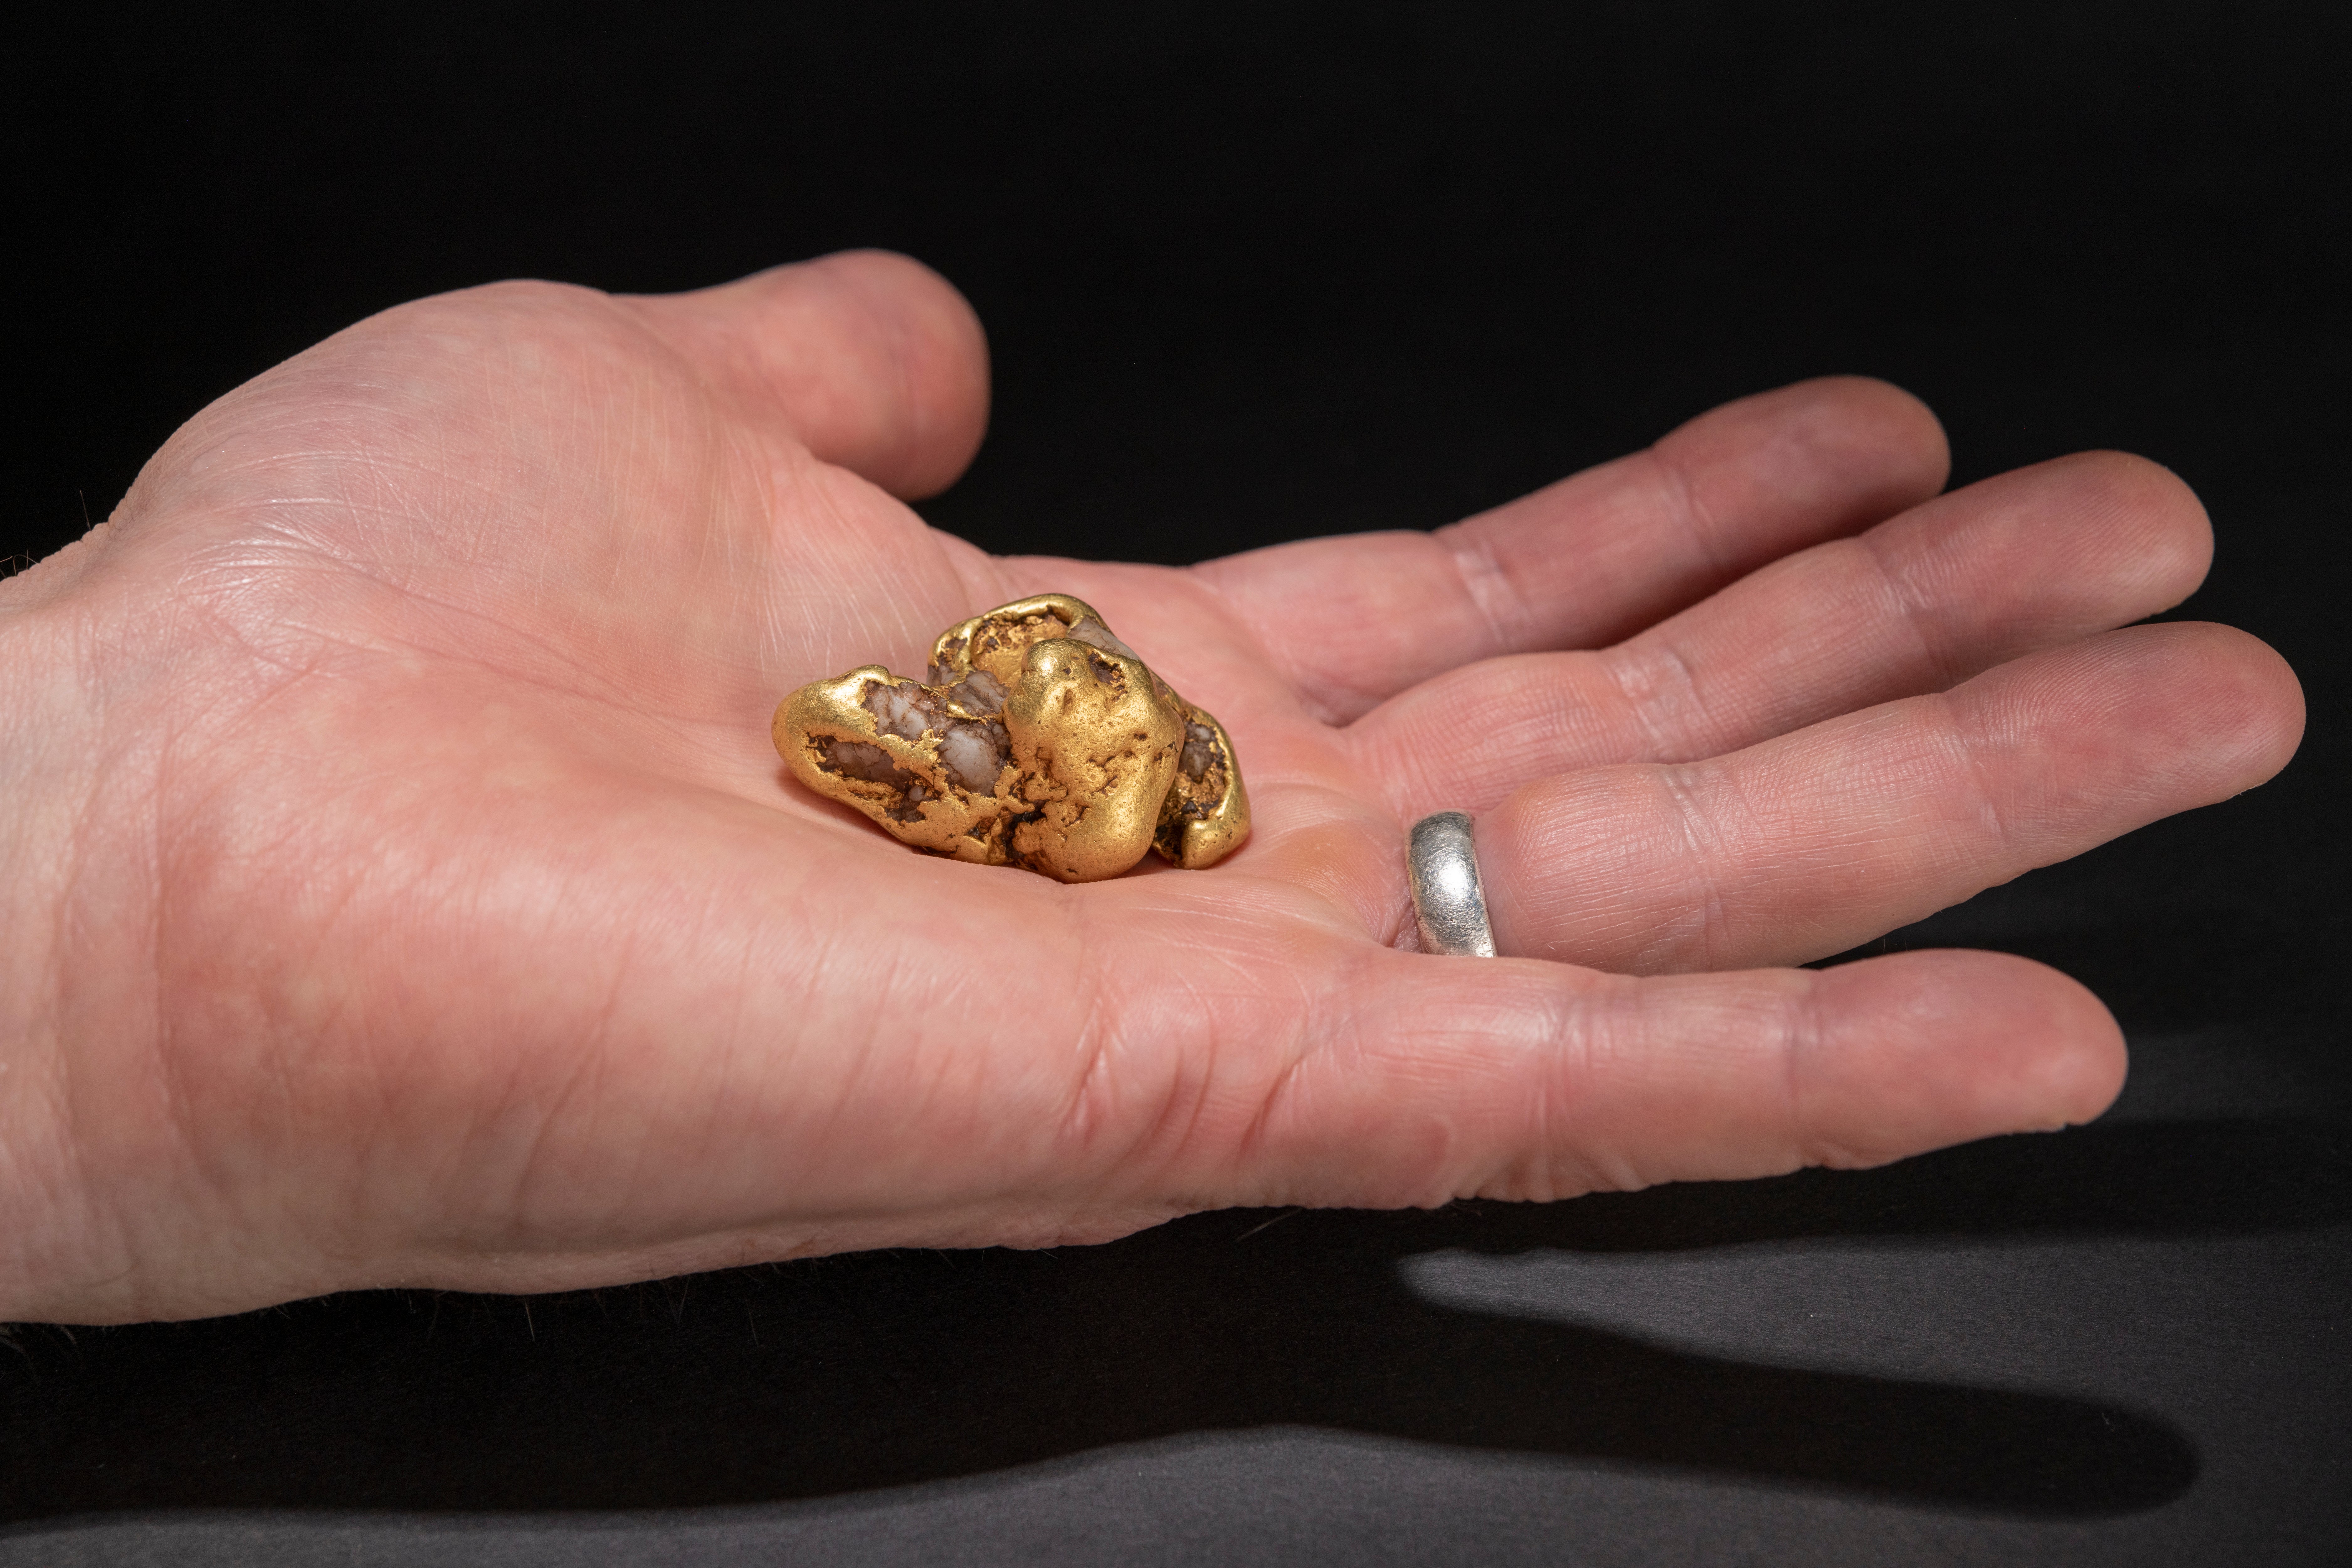 The gold nugget was found in a Scottish river